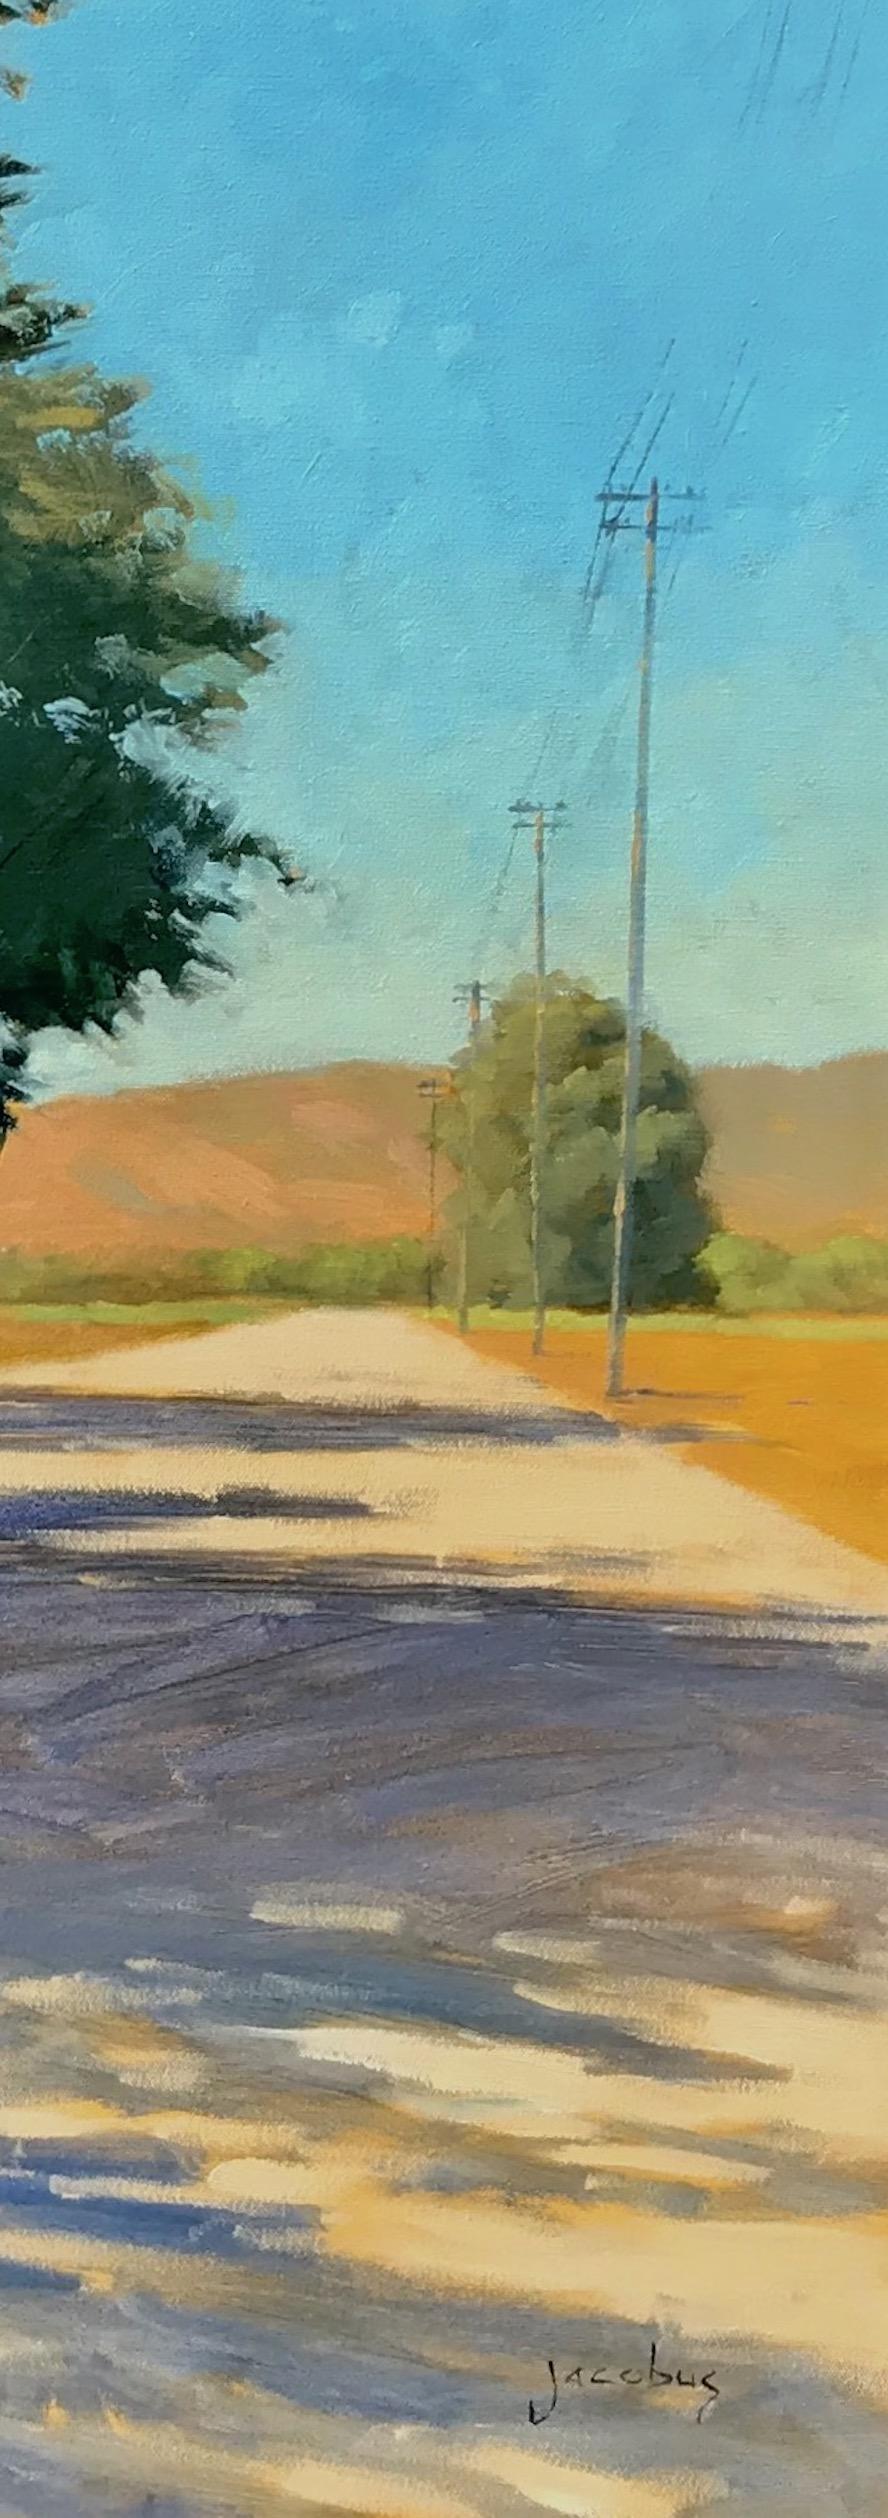 painting shadows in landscapes